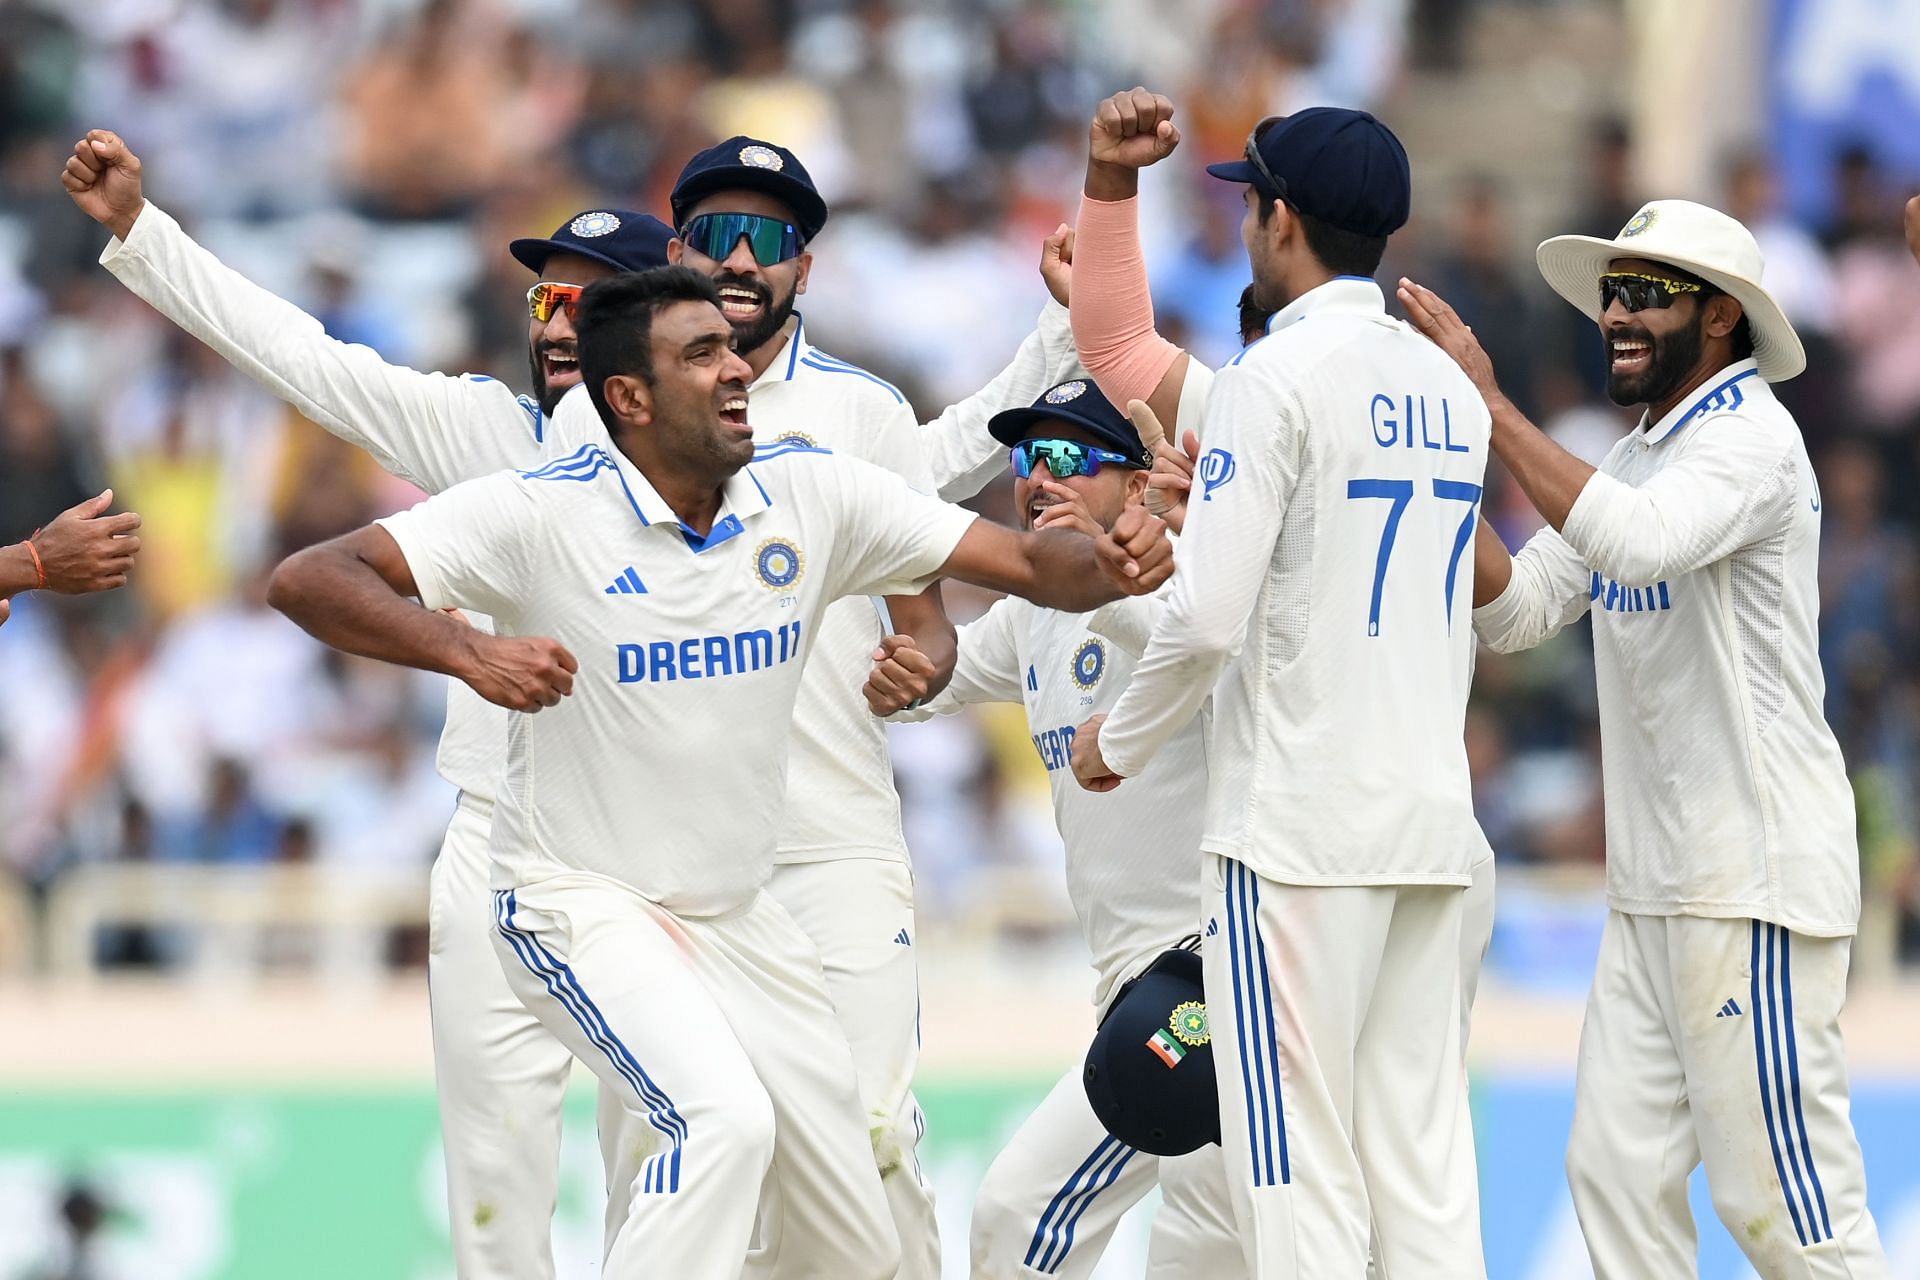 Ravichandran Ashwin dismissed Joe Root leg-before-wicket with a successful review.